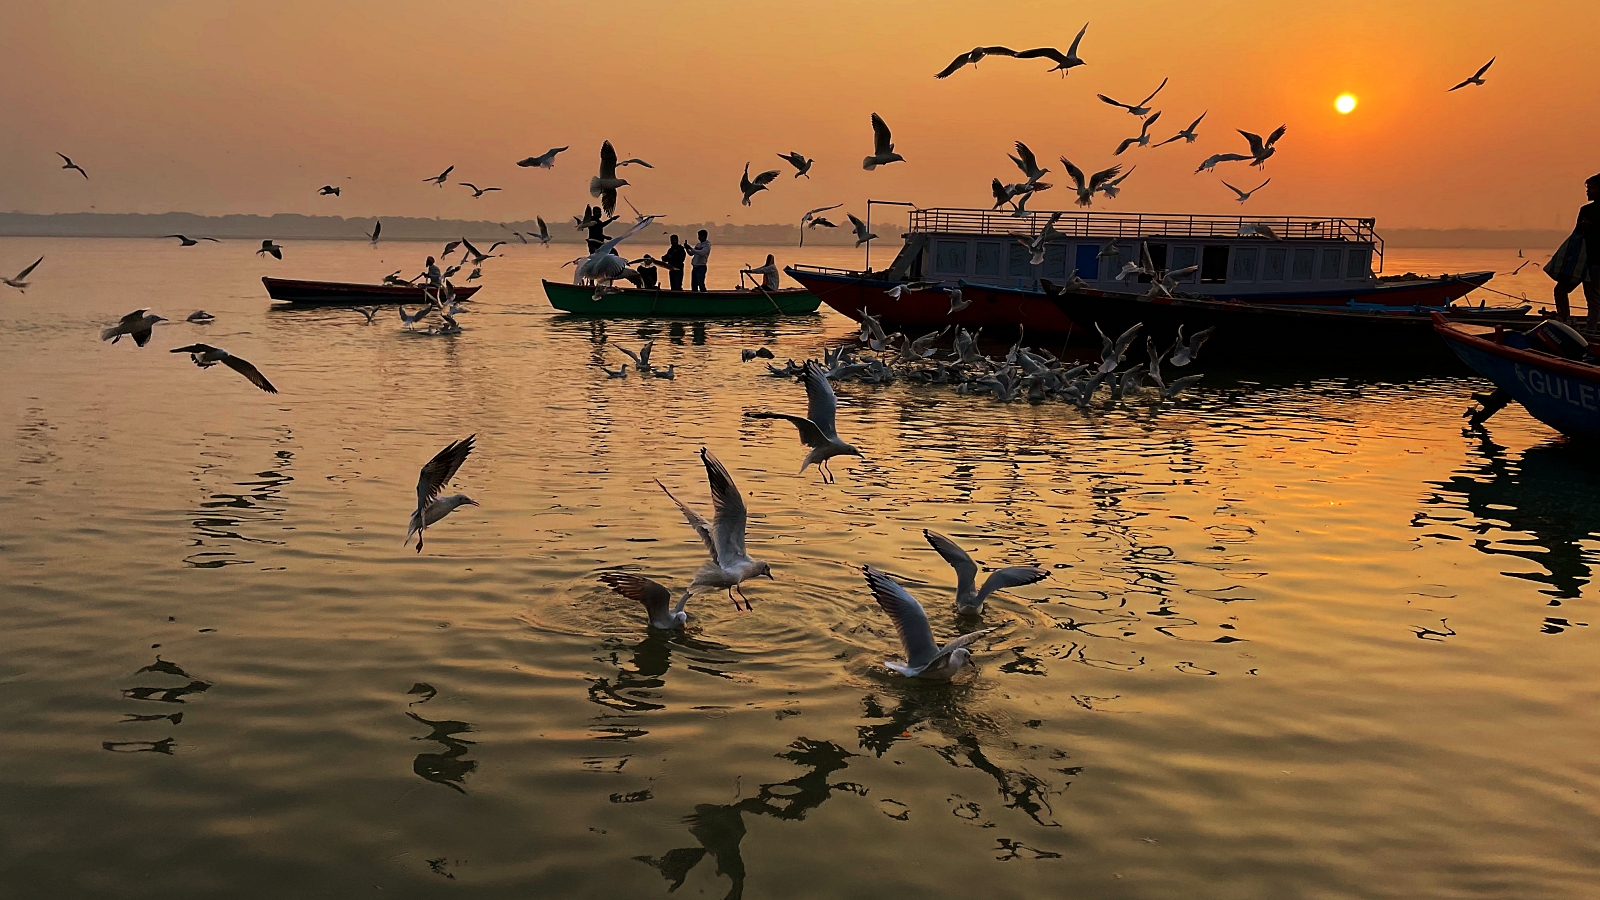 From Sunrise to Sunset: Uncovering India’s Most Stunning Ghats in Varanasi